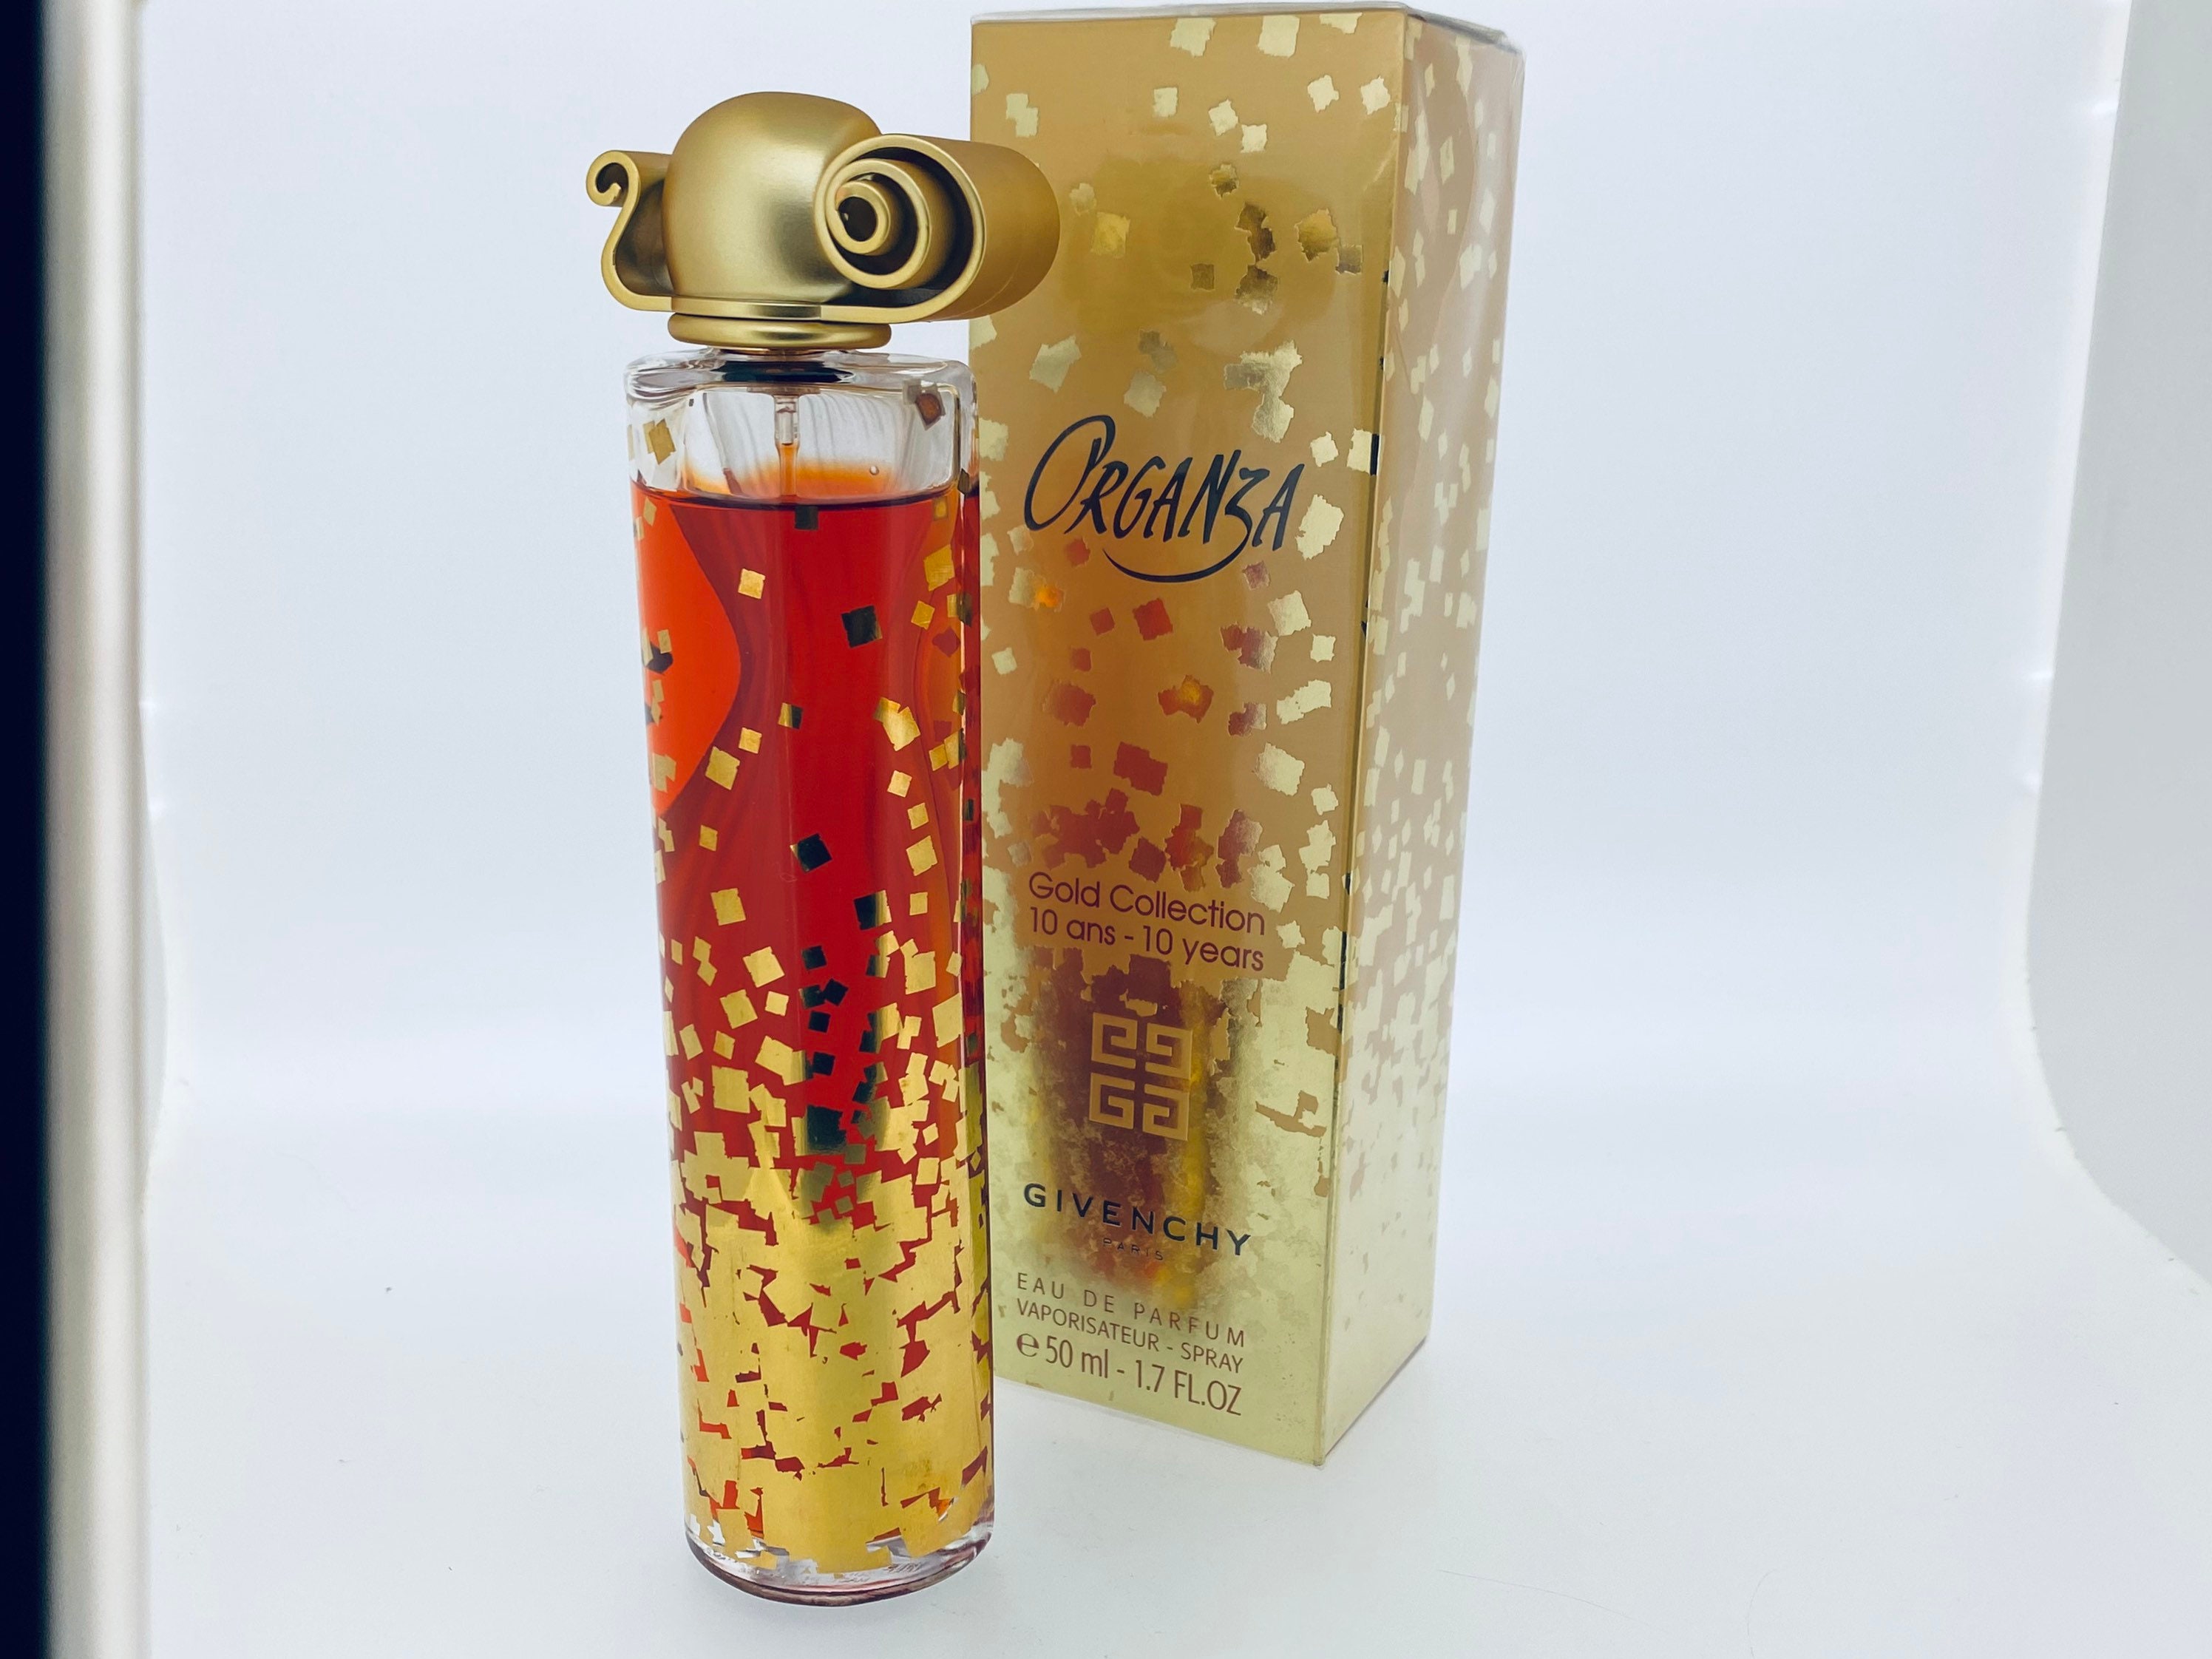 Organza Gold Collection 10 Ans 10 Years Givenchy EAU DE PARFUM 50 Ml - Etsy